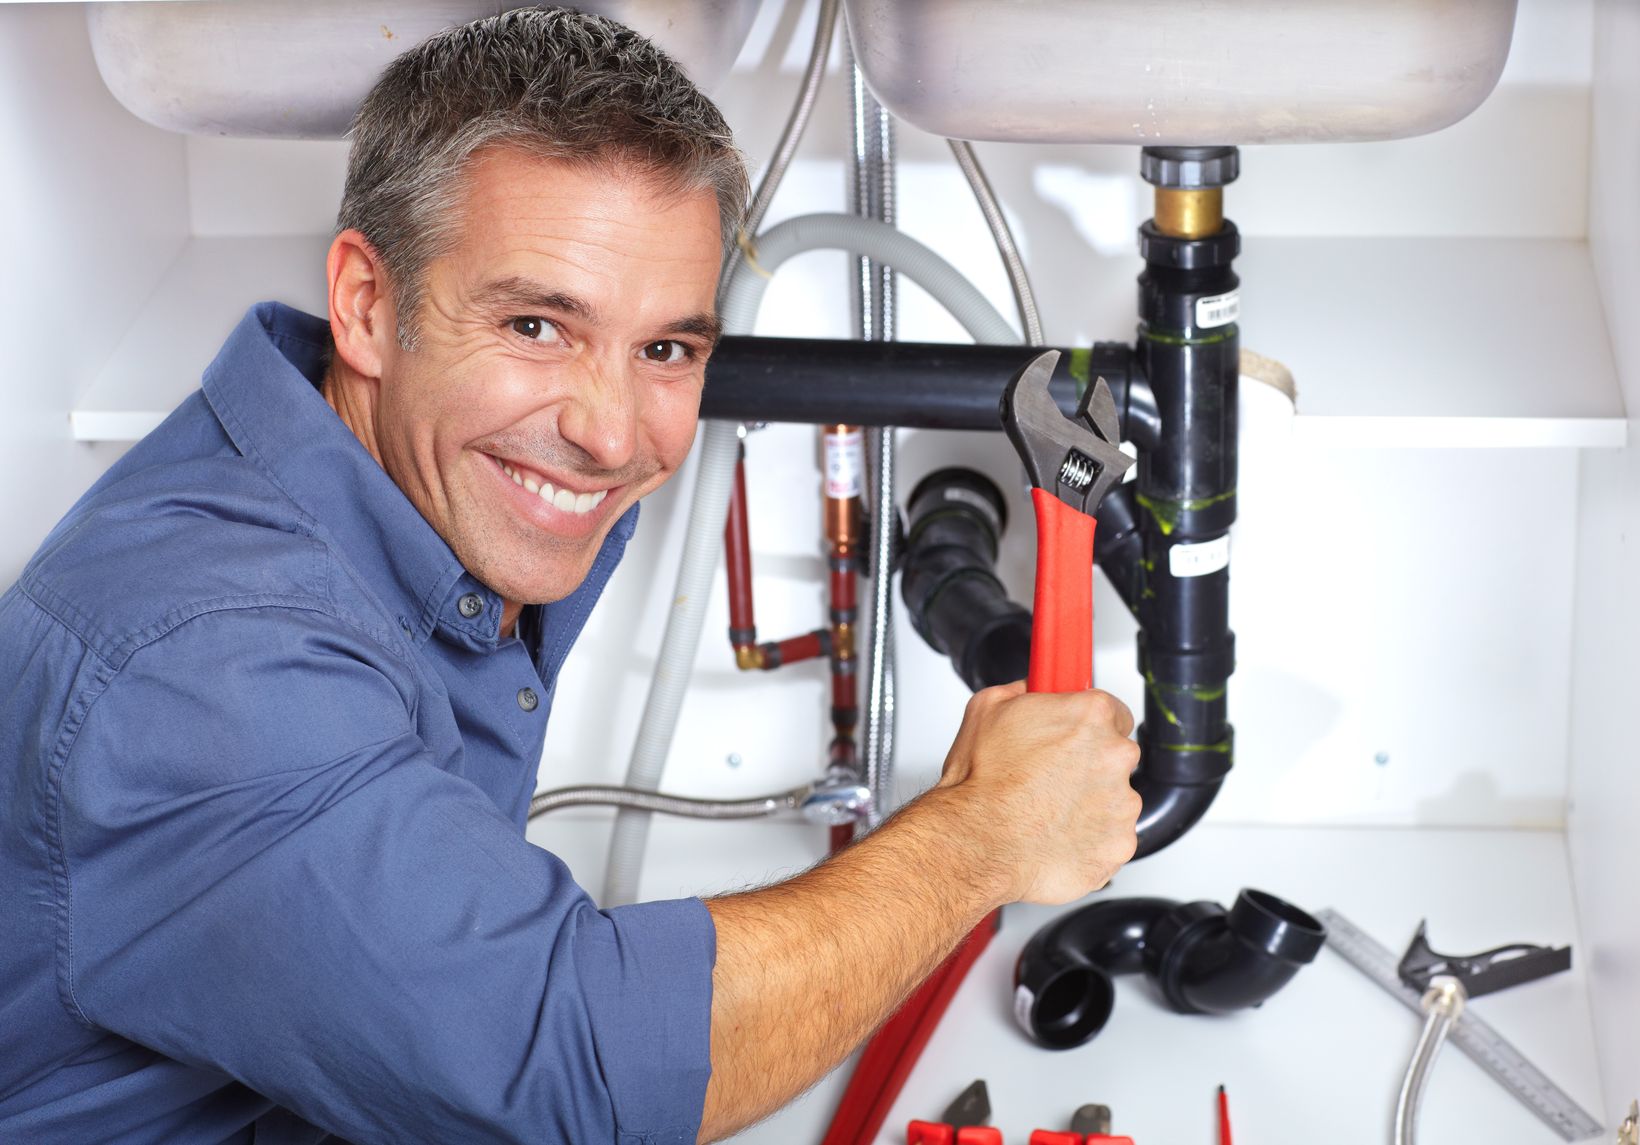 What to Expect from Searching for “Plumber near Me”